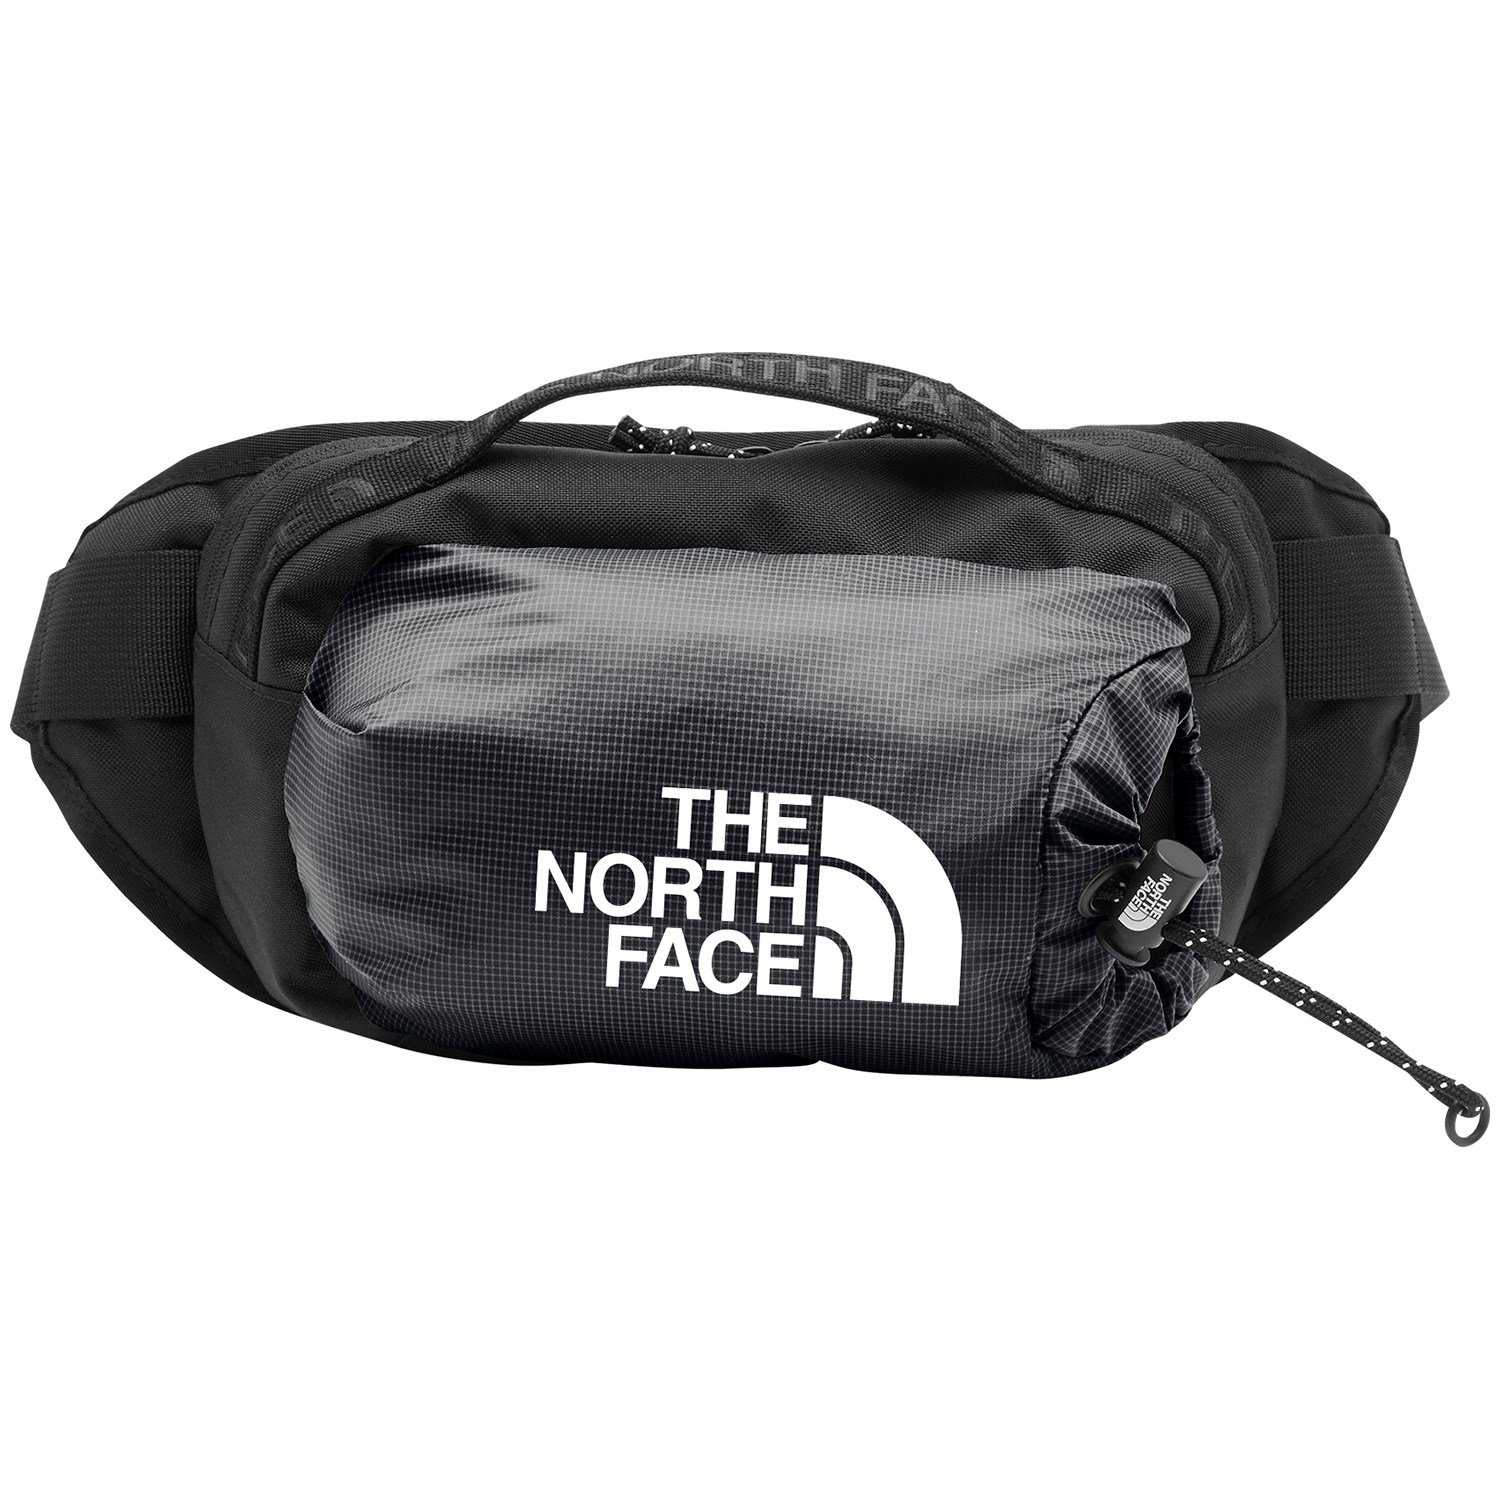 The North Face Bozer Hip Pack III Review